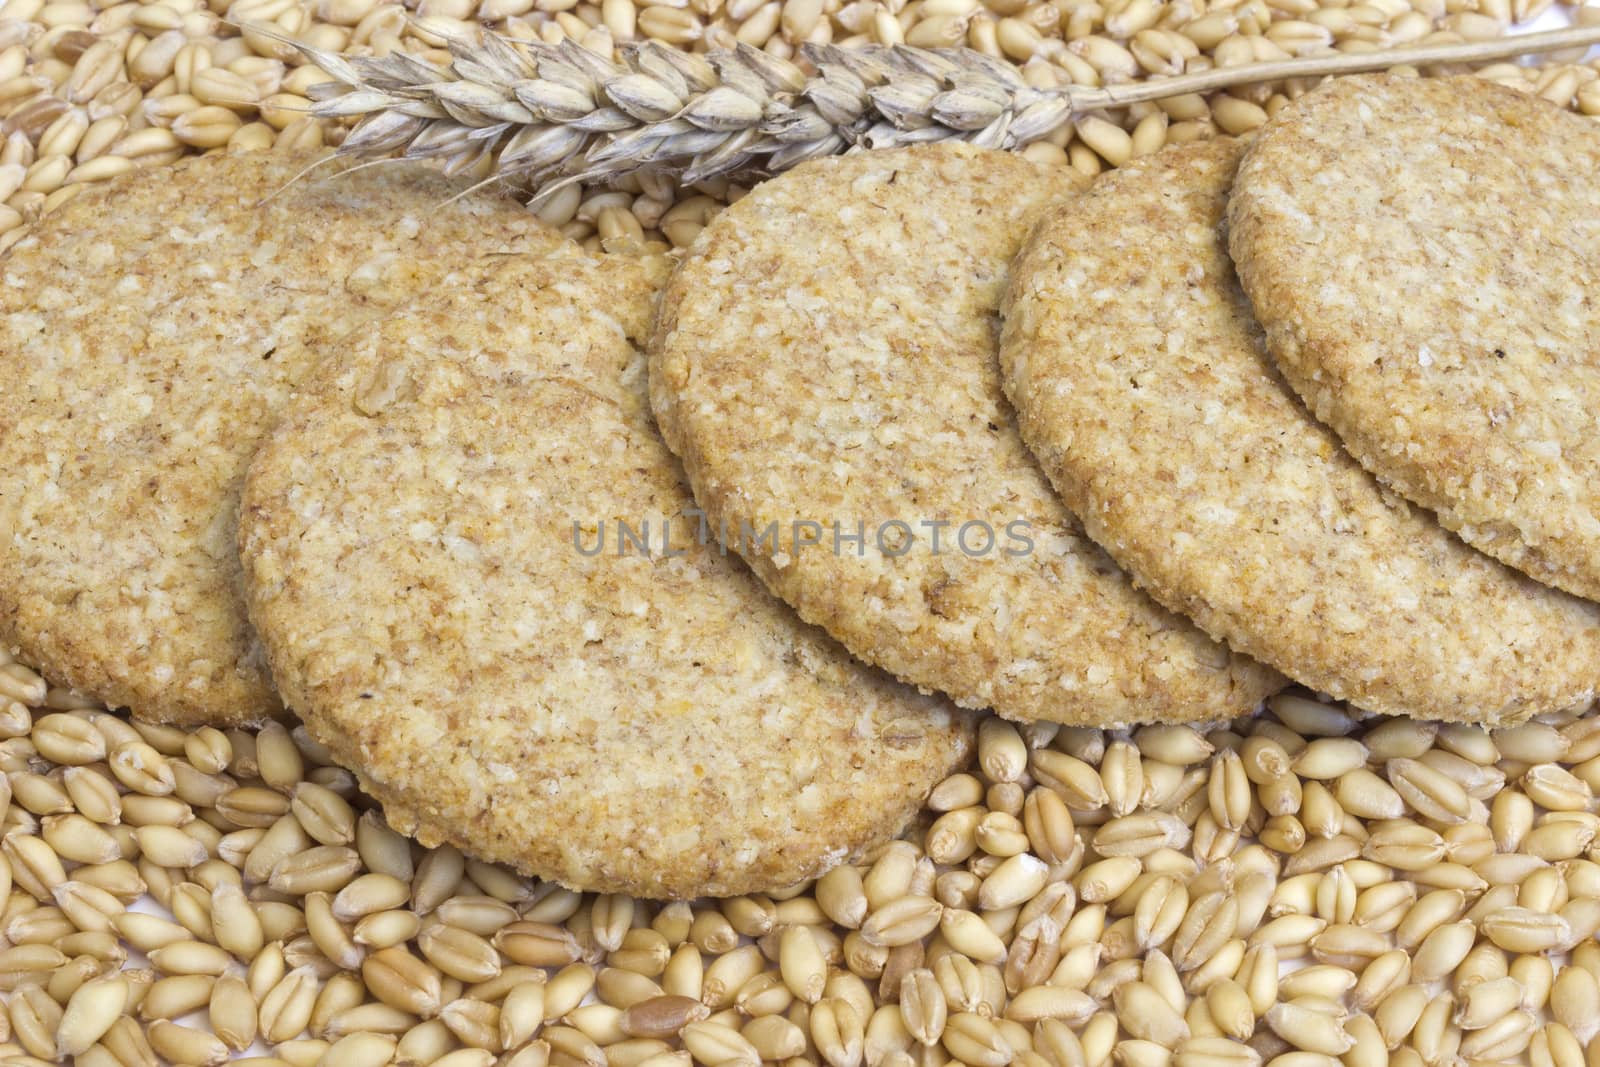 Crunchy biscuit with wholemeal flour